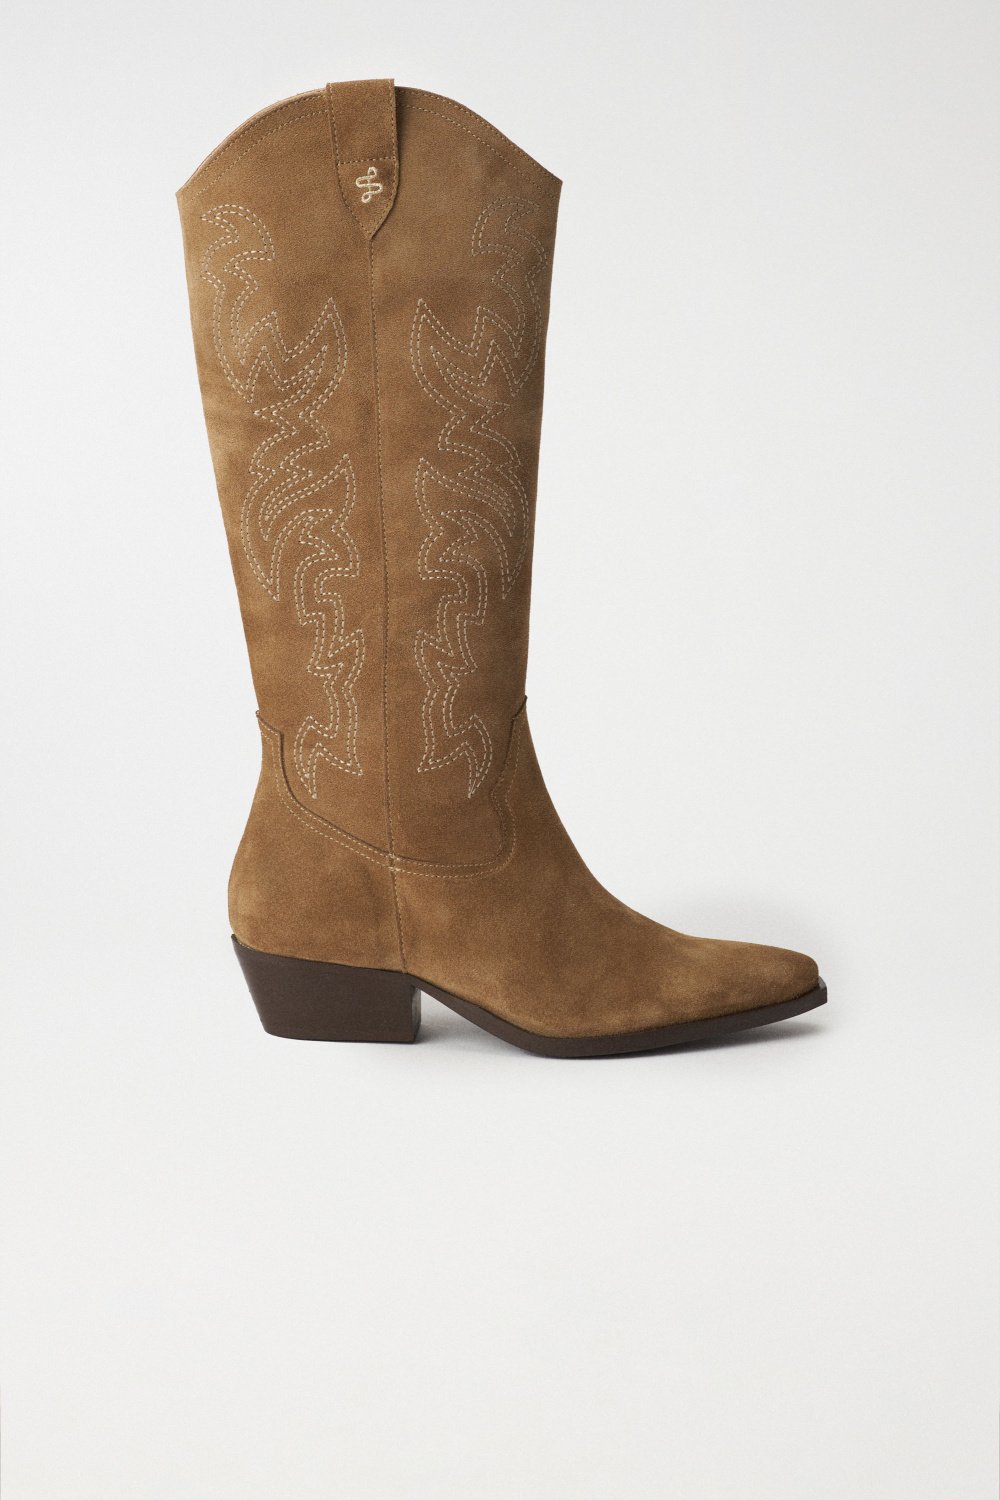 EMBROIDERED LEATHER COWBOY BOOTS - Salsa